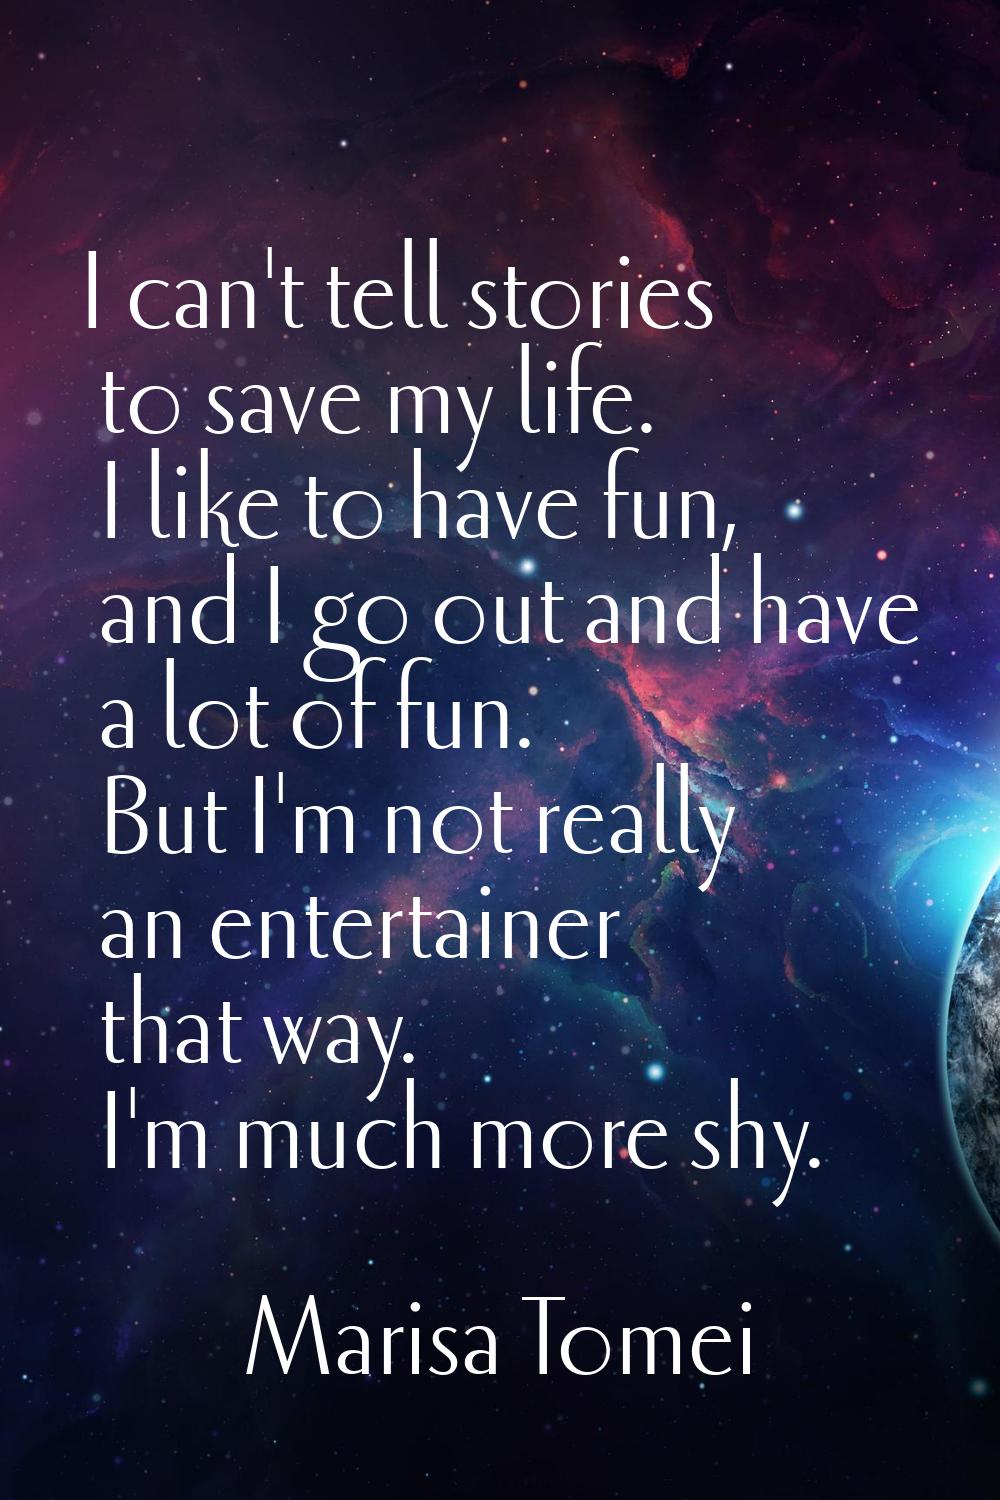 I can't tell stories to save my life. I like to have fun, and I go out and have a lot of fun. But I